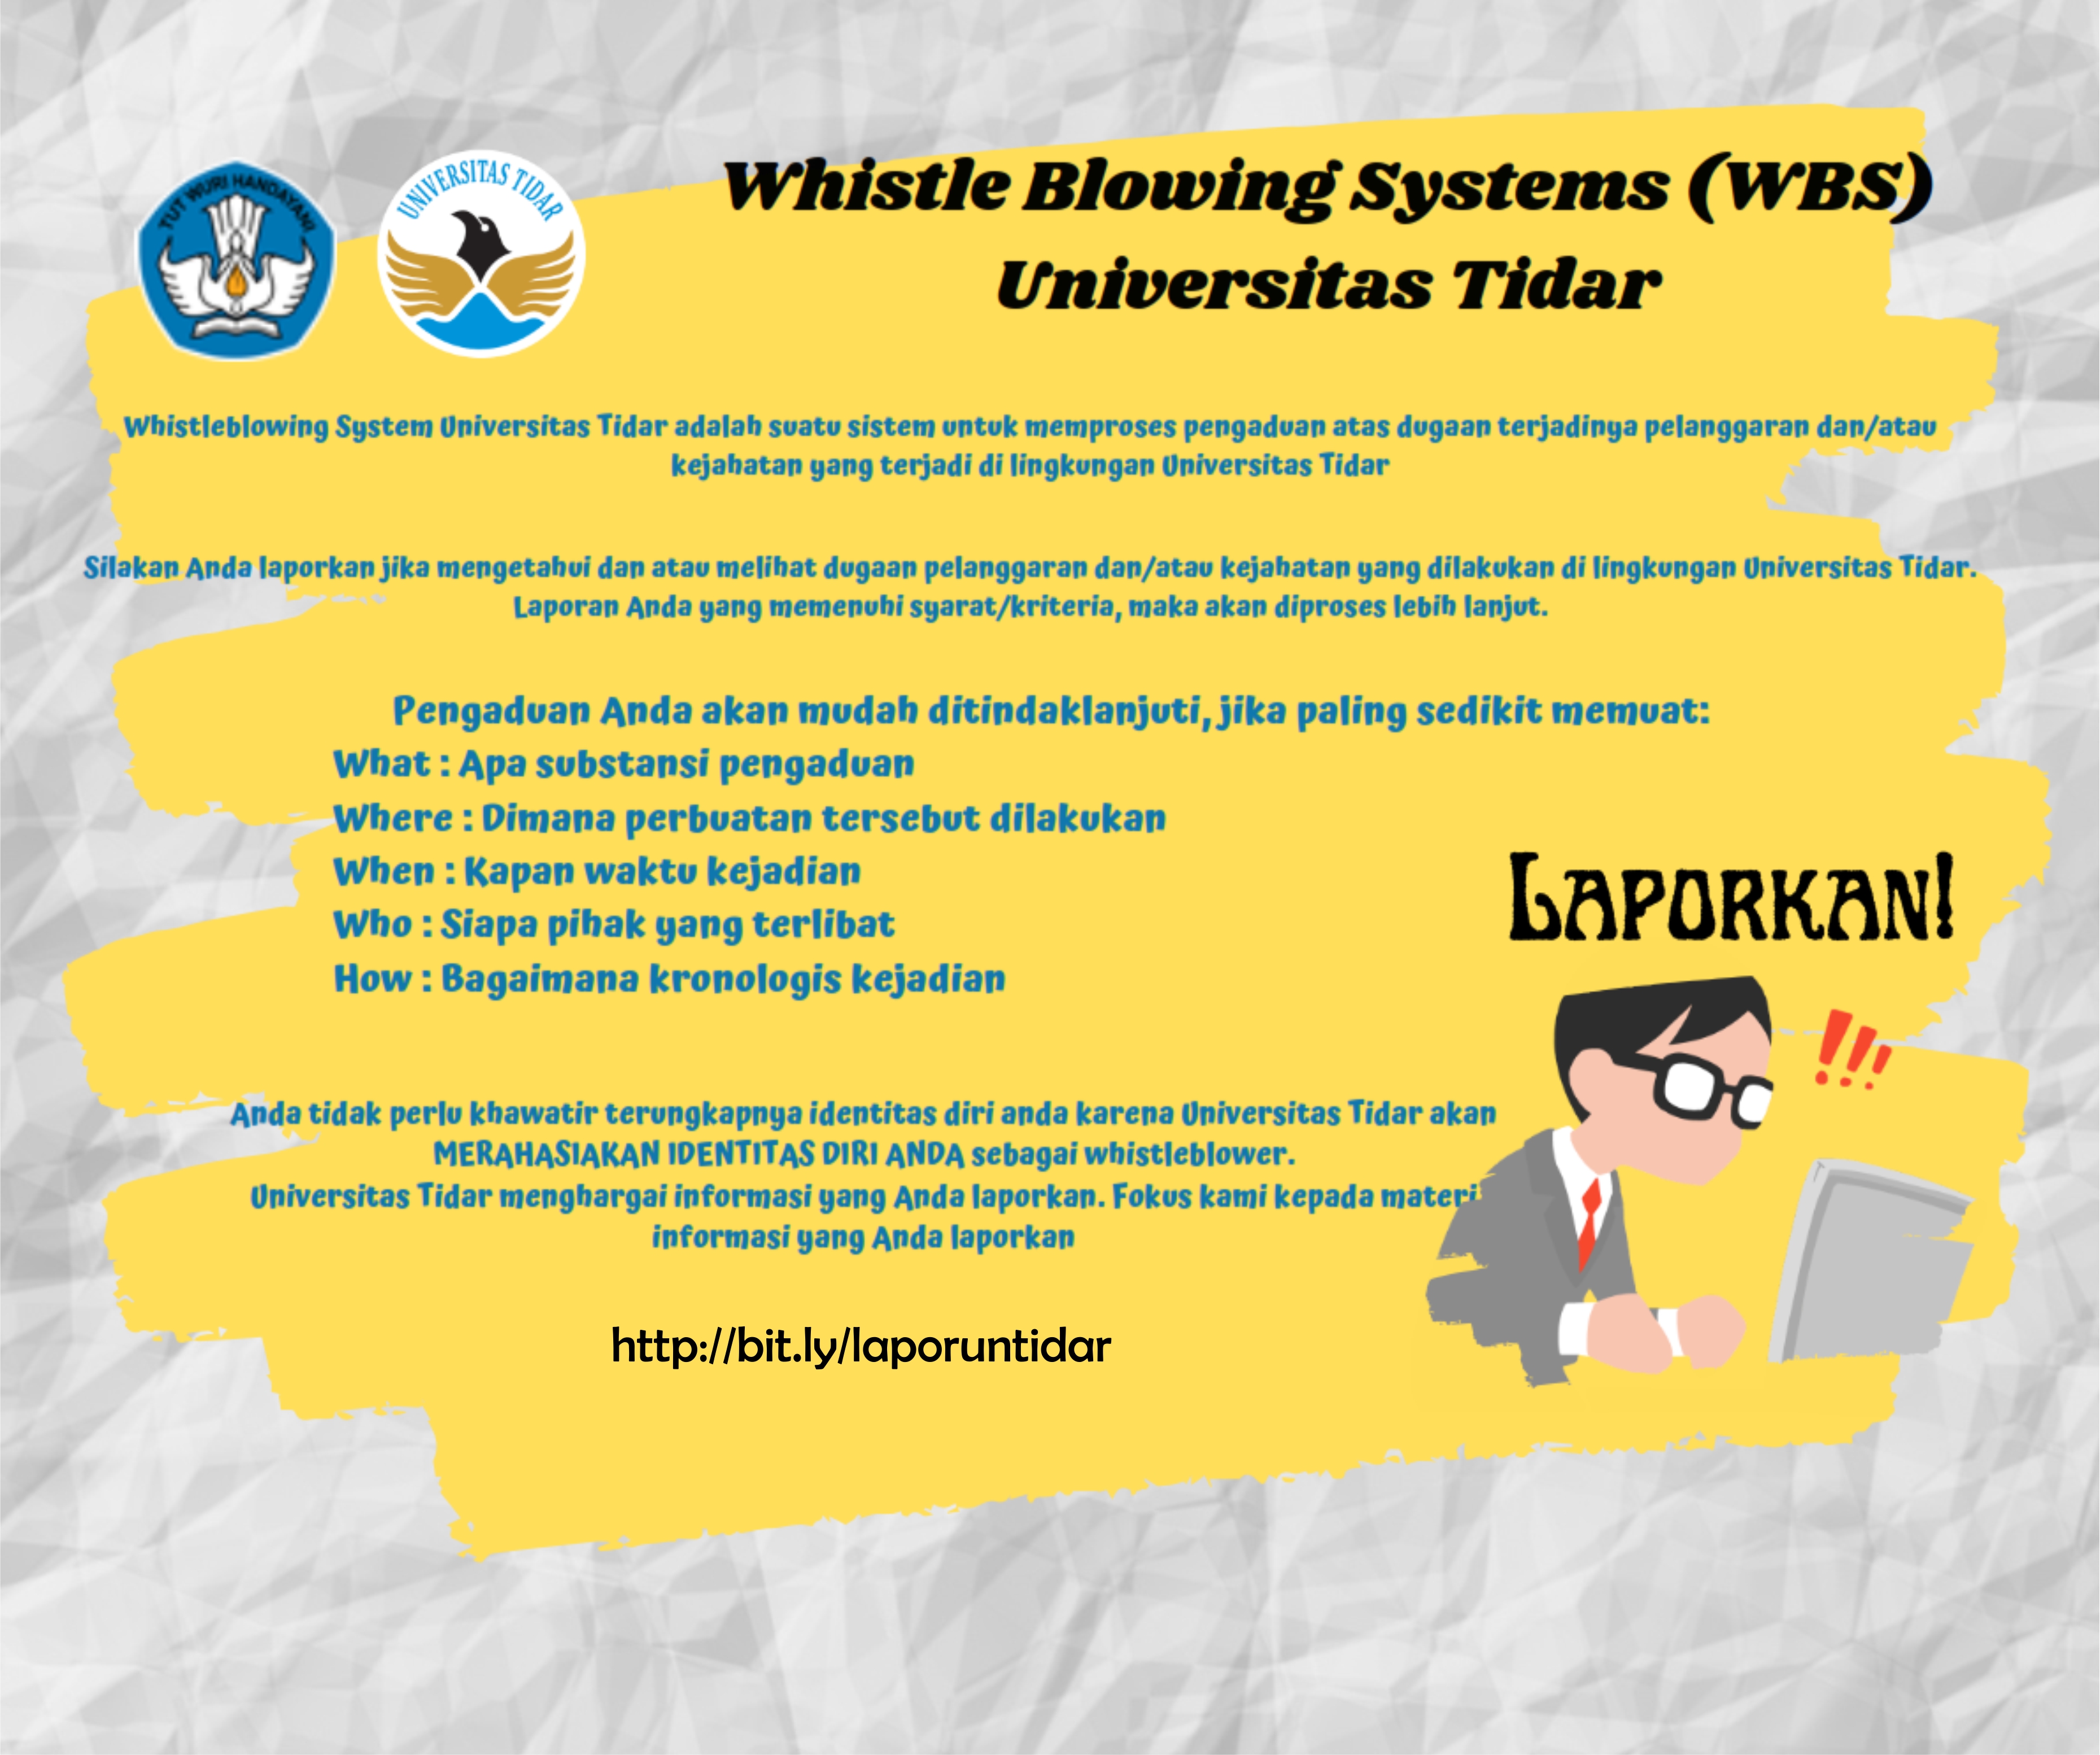 Whistle Blowing Systems (WBS) Universitas Tidar